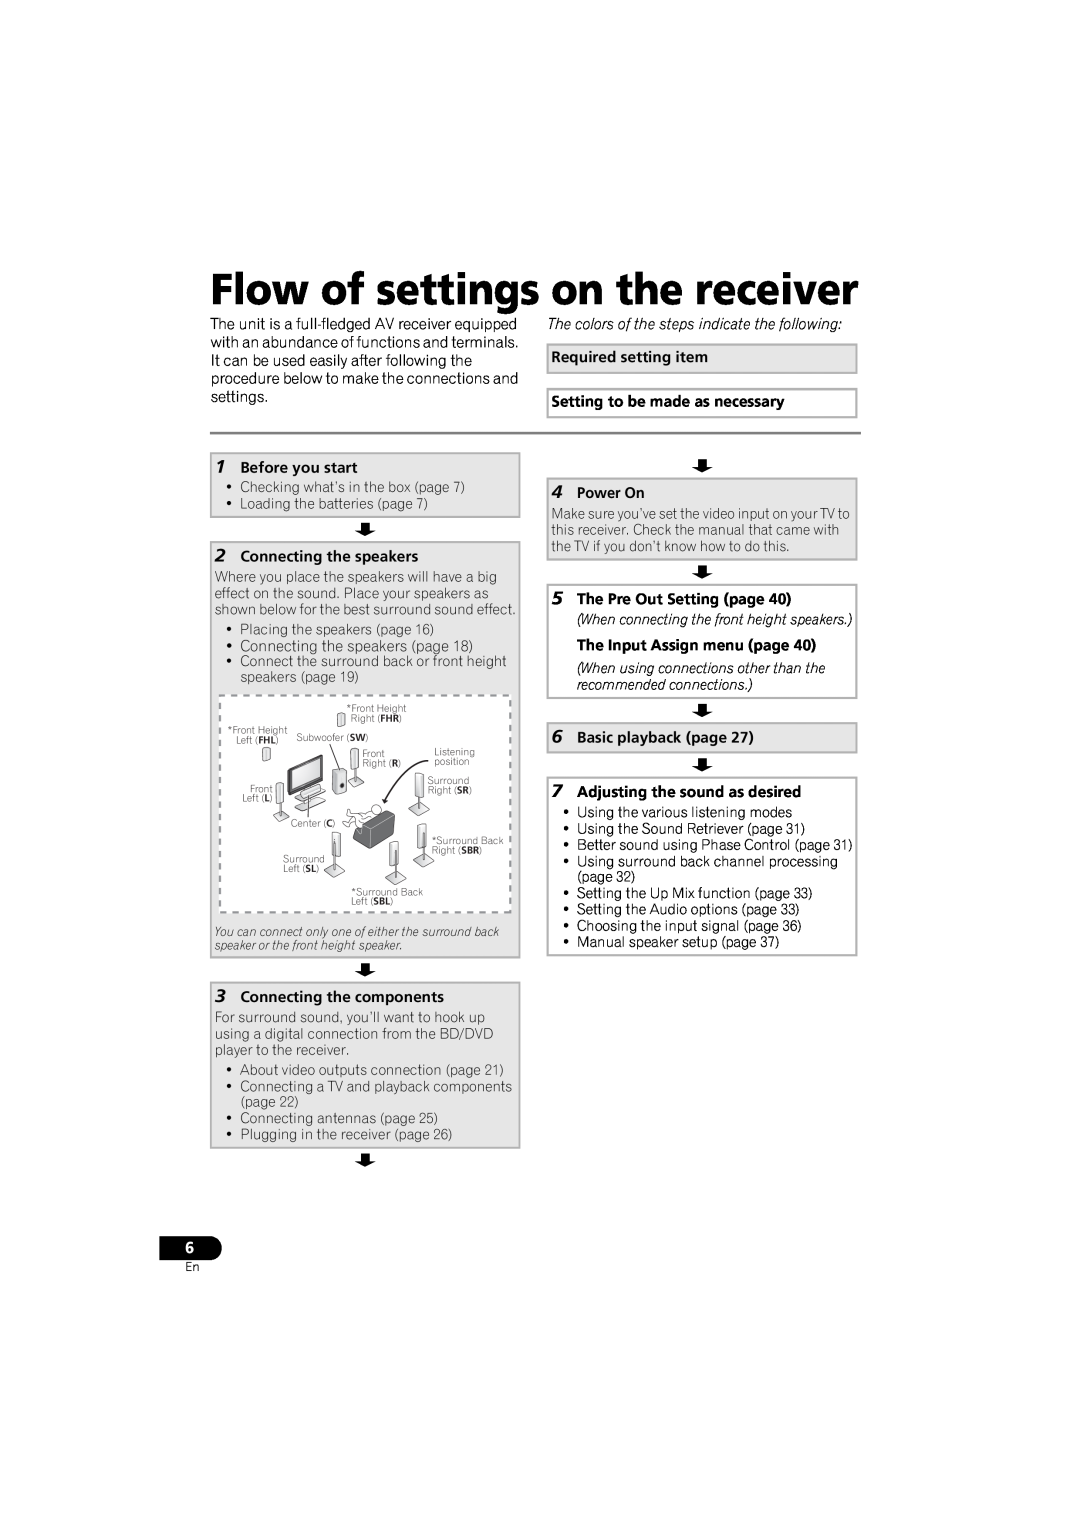 Pioneer VSX-520 manual Flow of settings on the receiver 